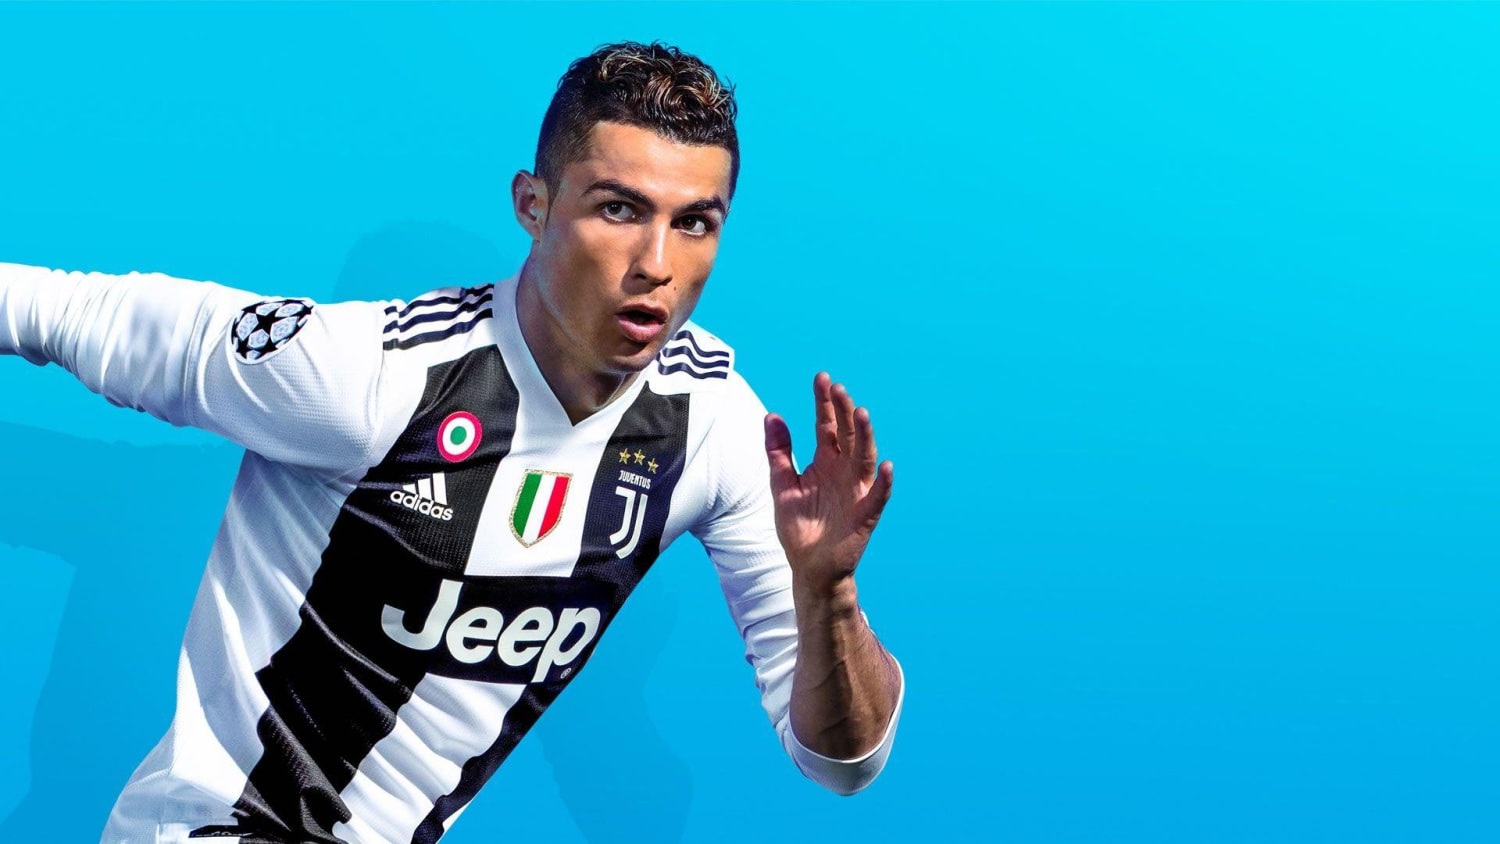 vos Verlaten component Fifa 19 cheat guide: How to cheat in FIFA 19